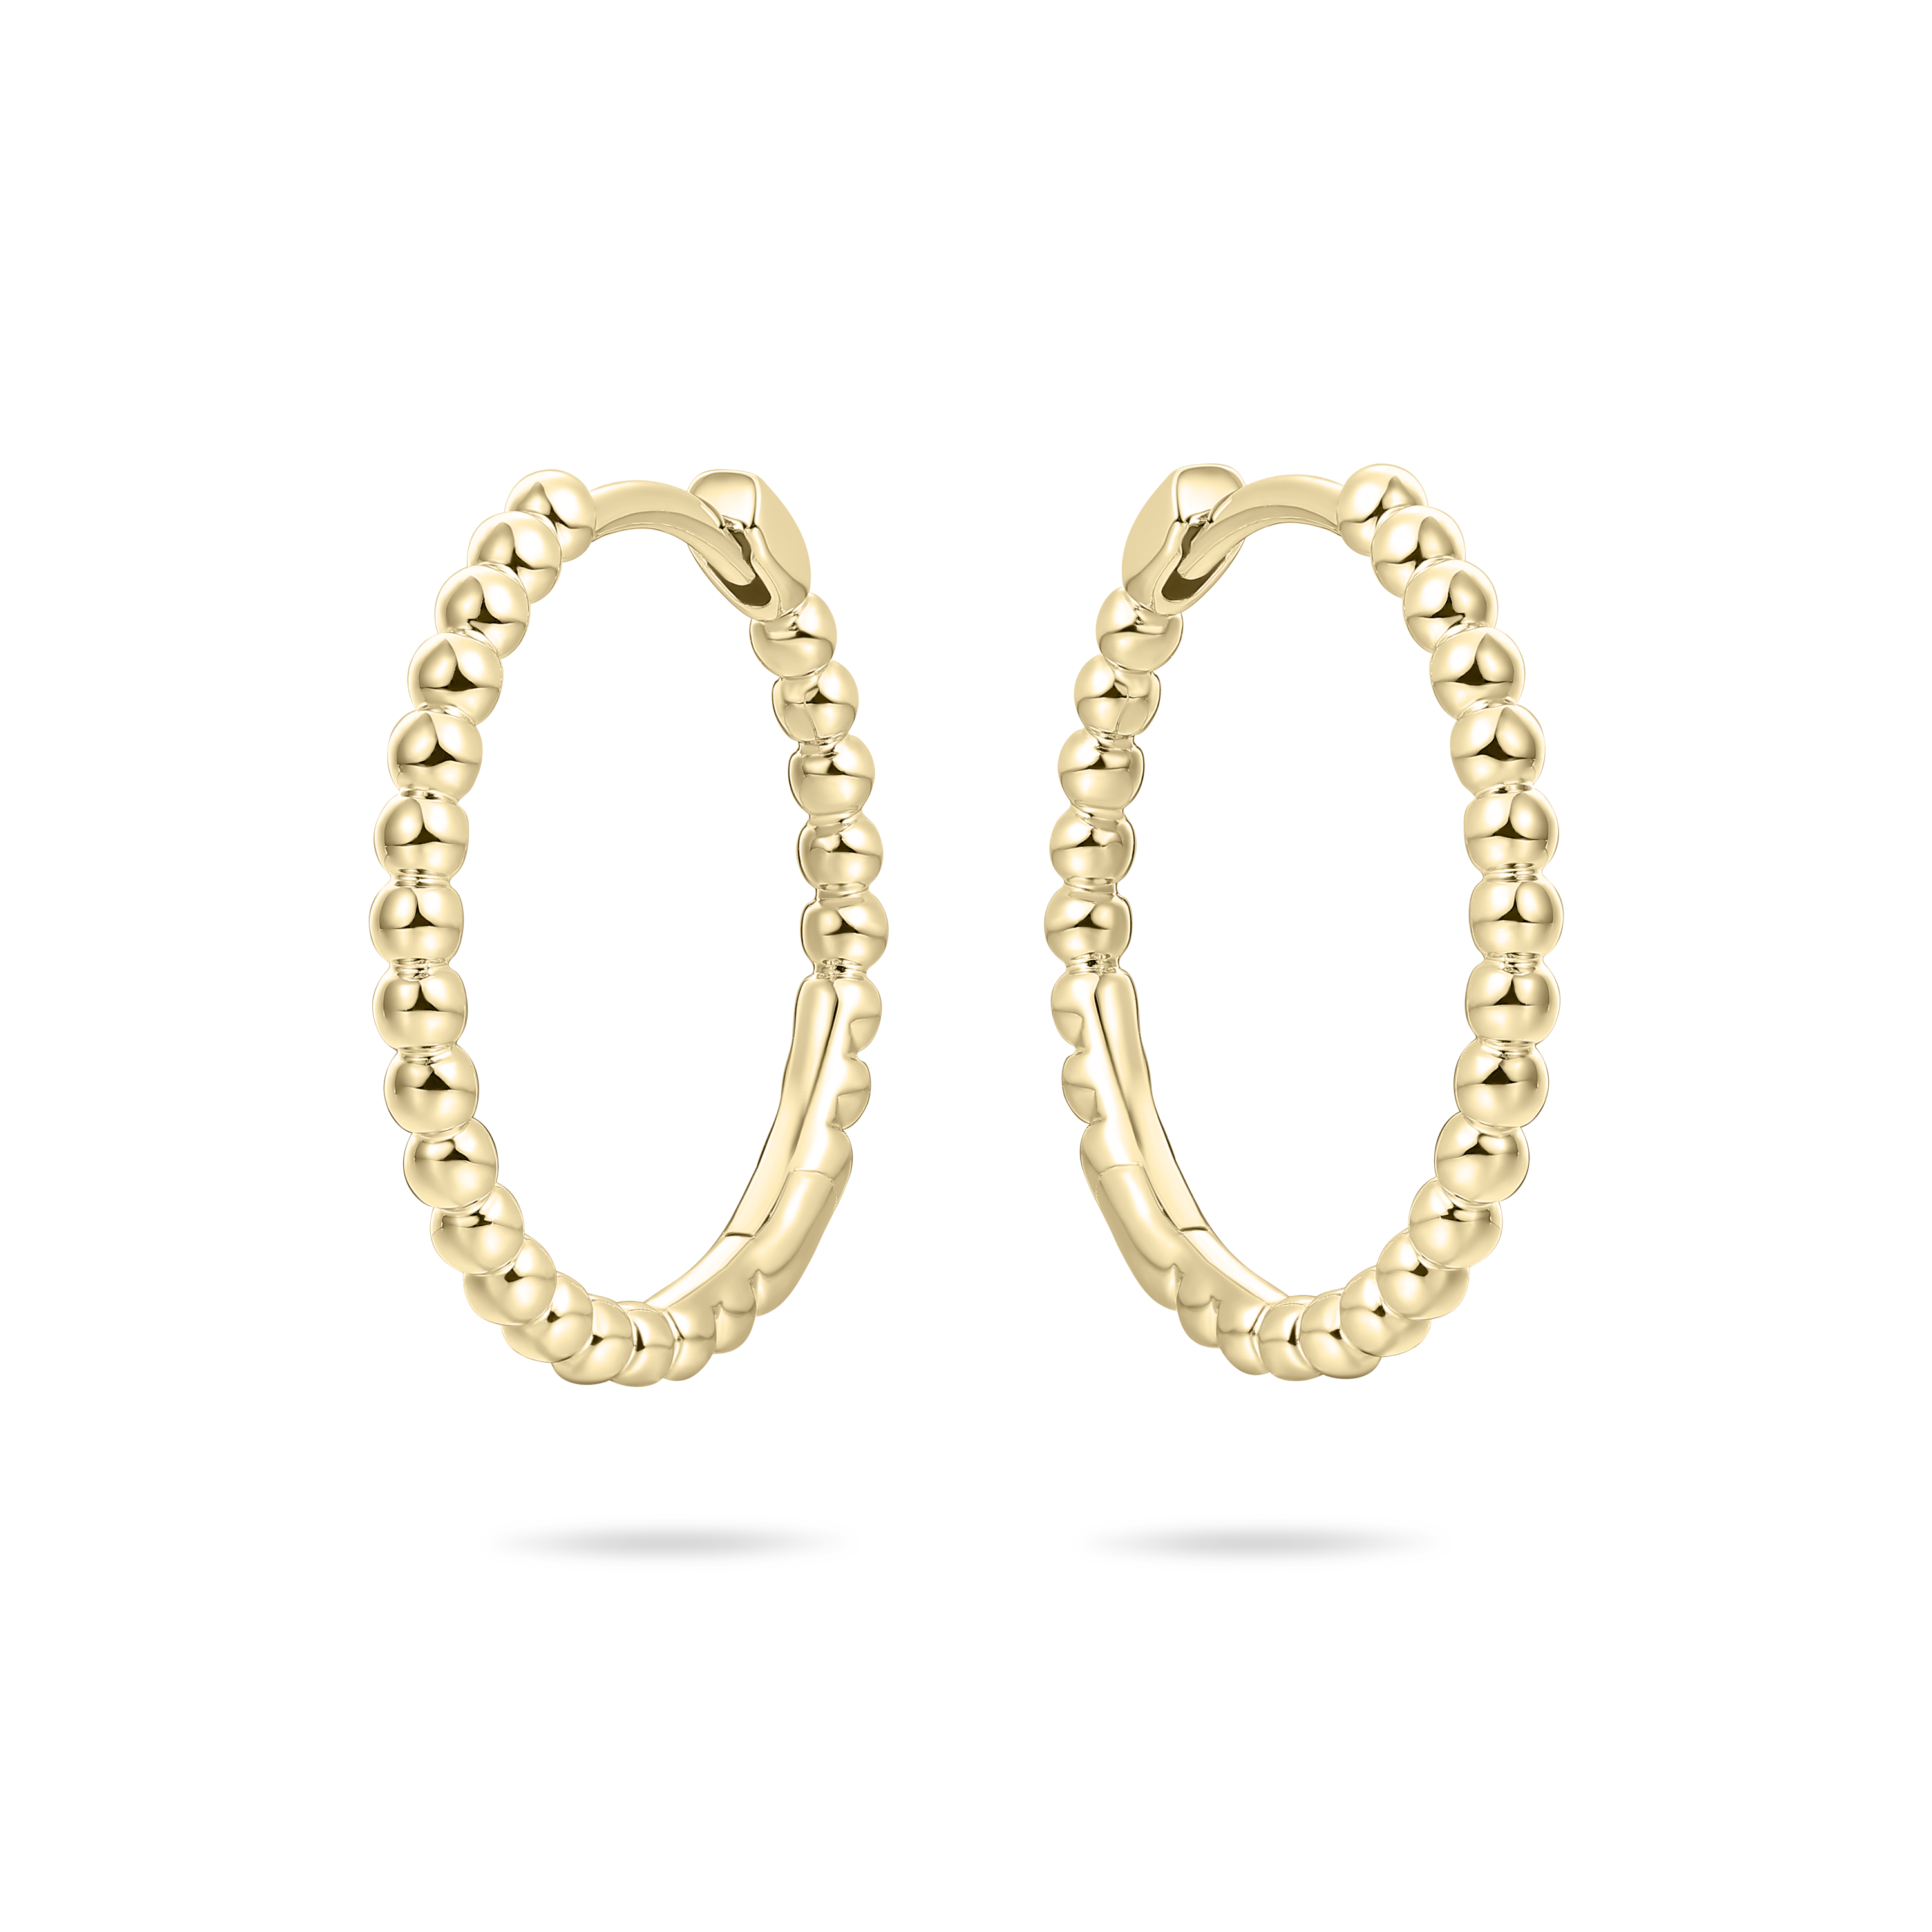 Gisser Jewels Earrings Gold Plated Silver Beaded Hoops